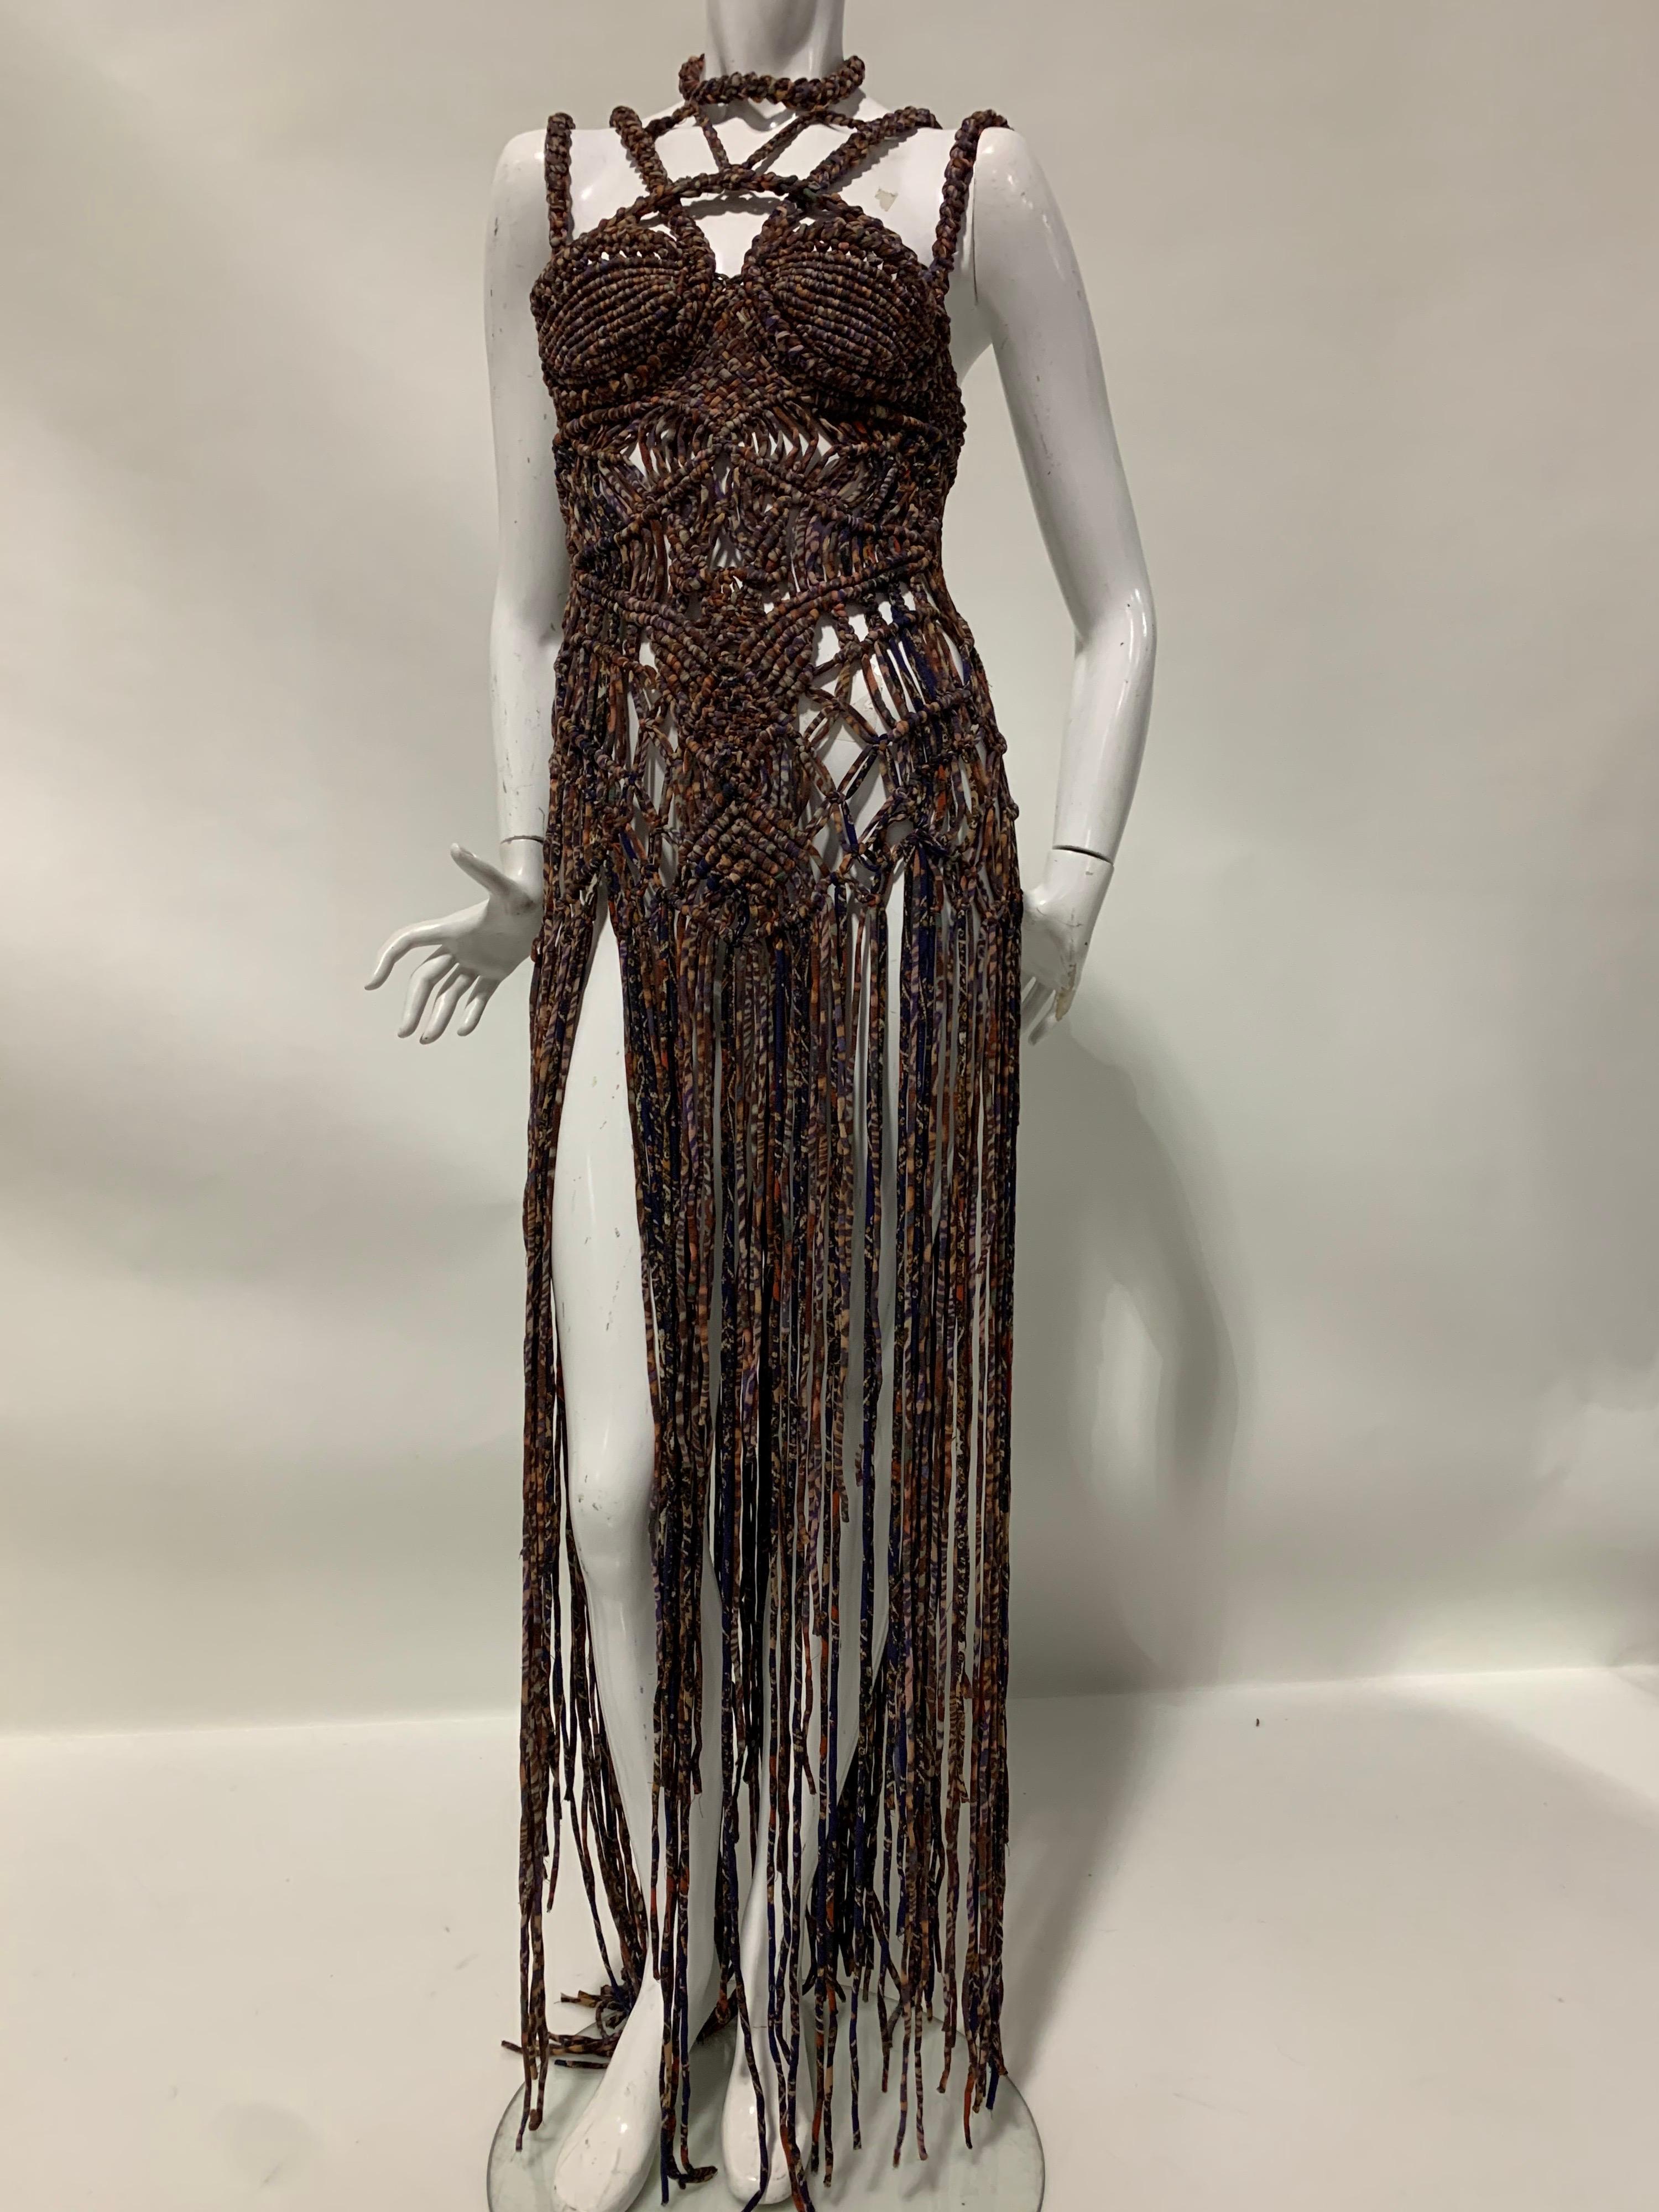 Torso Creations “Ibiza” Macrame Gown: Incredible hand-crafted macrame loungewear in sienna and indigo tones, constructed of microfiber stretch knitted piping, making it water friendly. Full length fringe adds drama to this one-of-a-kind piece.